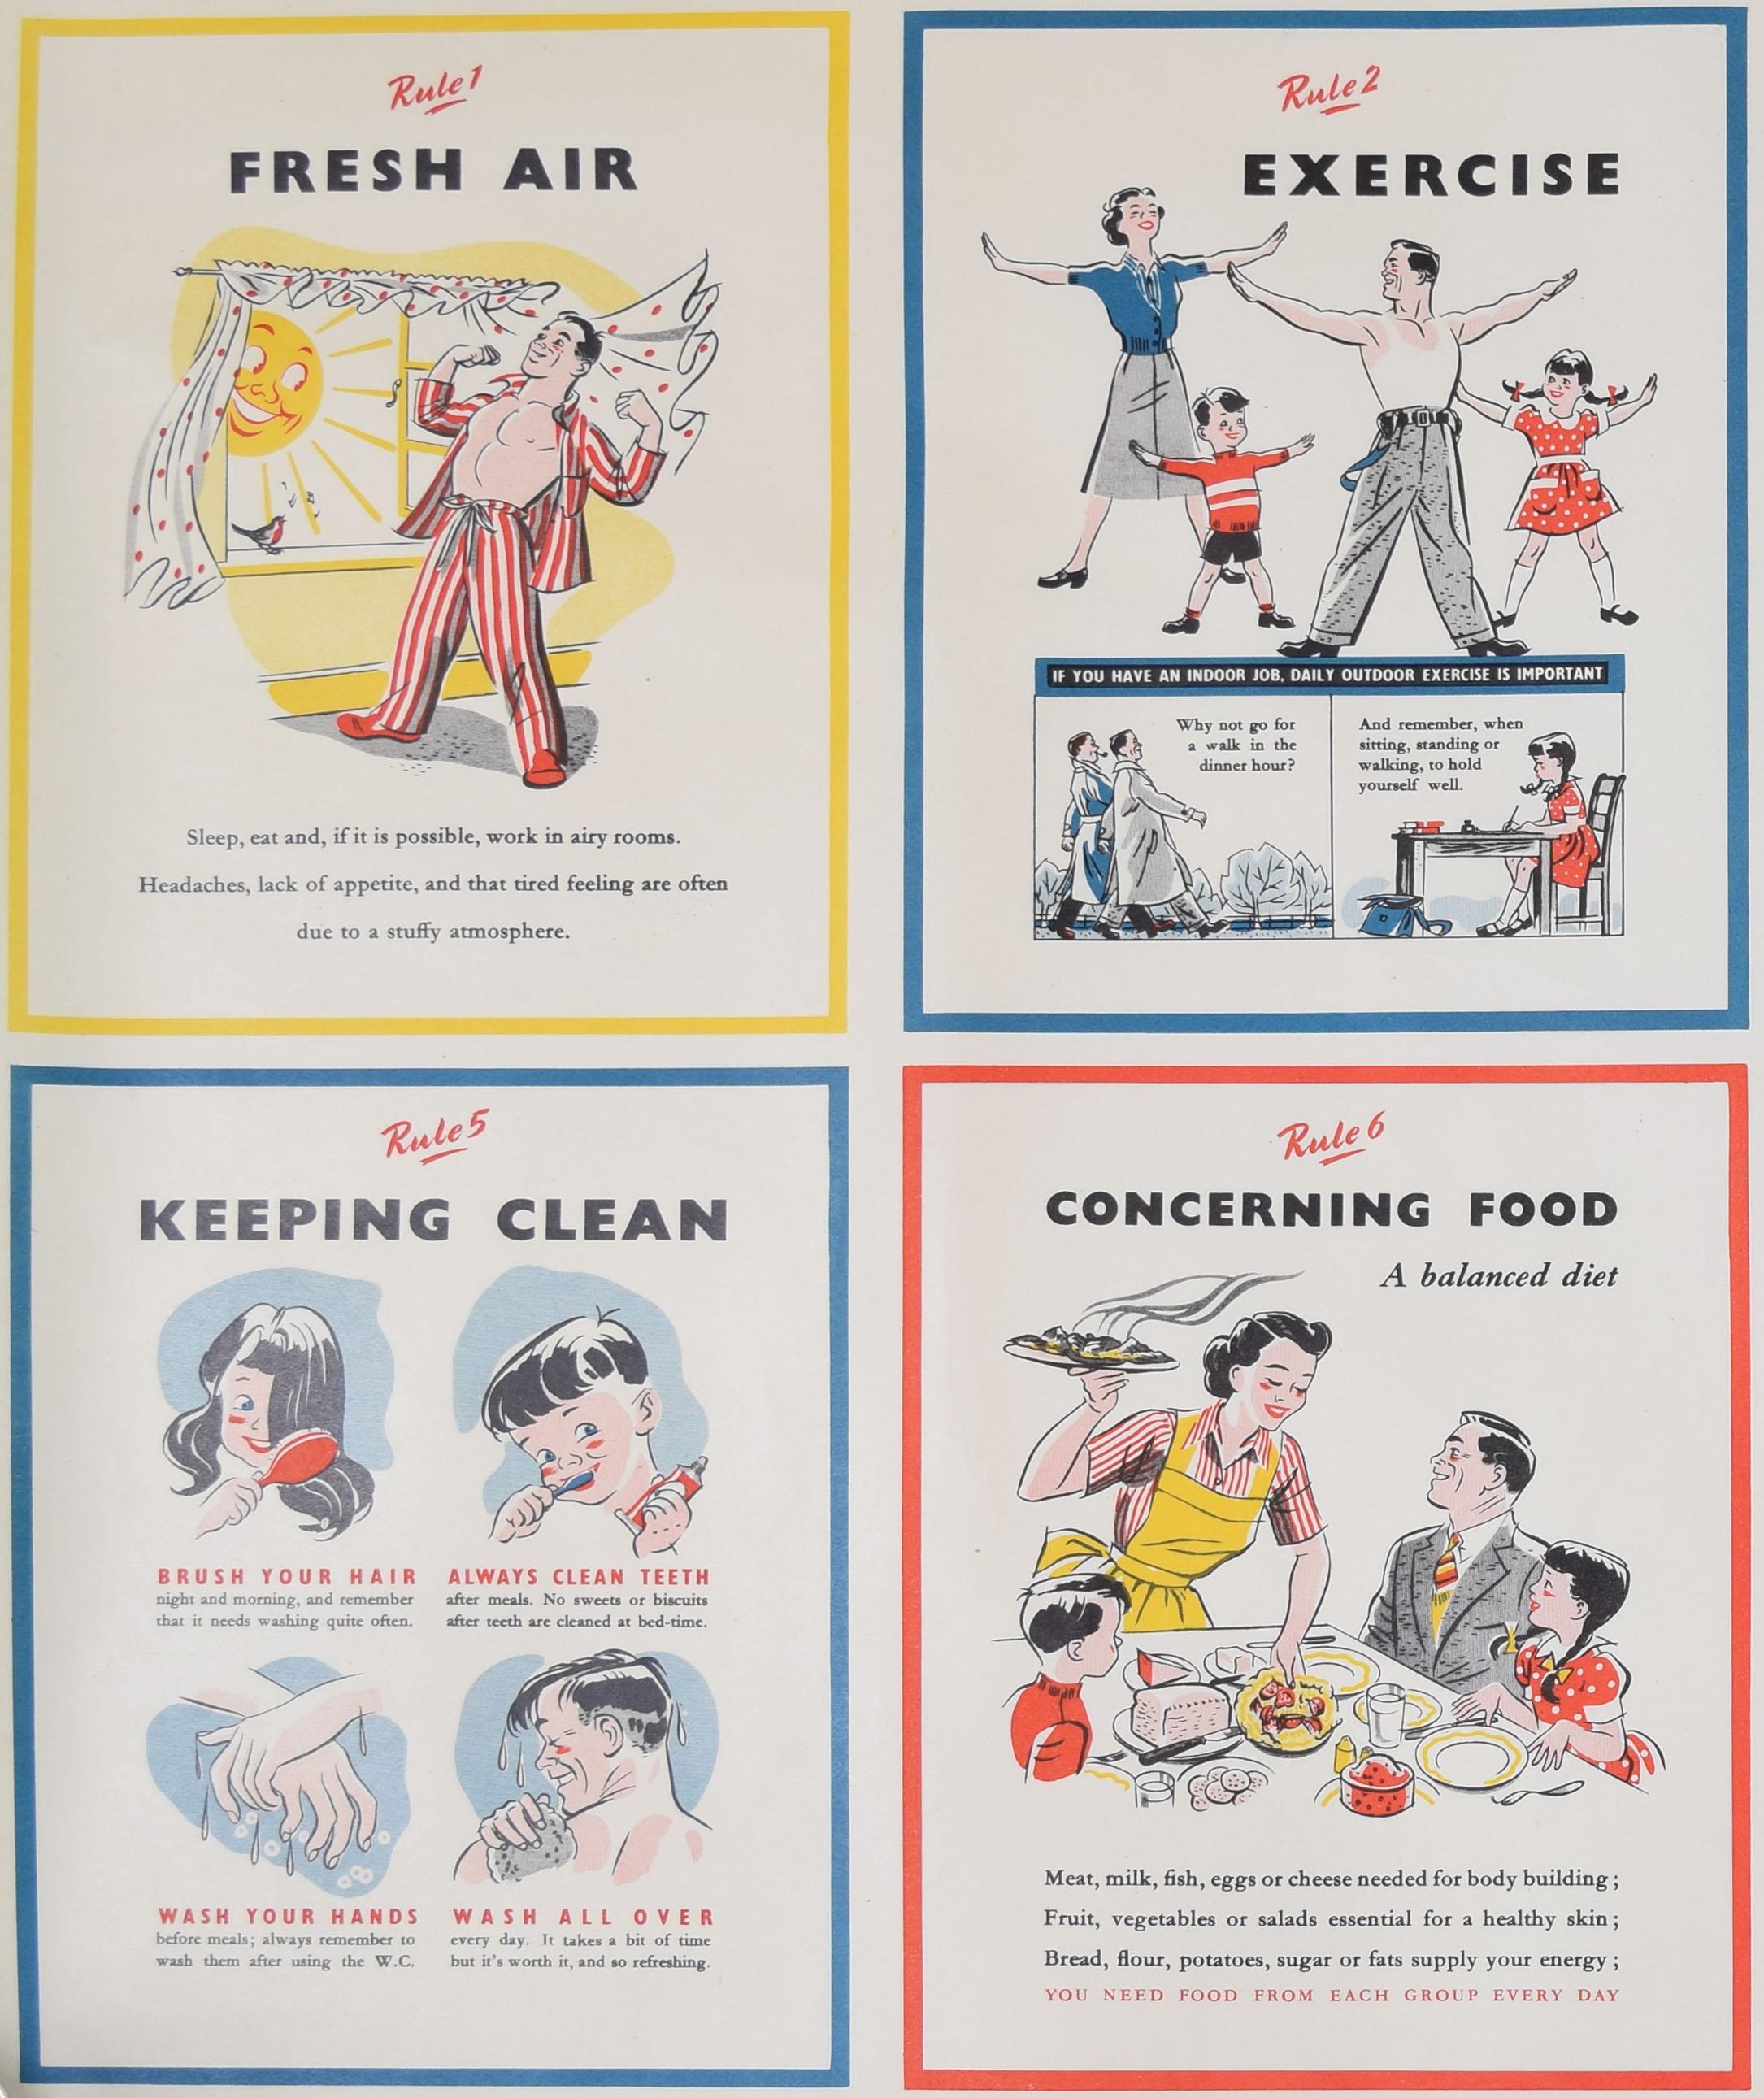 The Seven Rules of Health UK British Government Propaganda Poster HMSO c1950 - Modern Print by Unknown